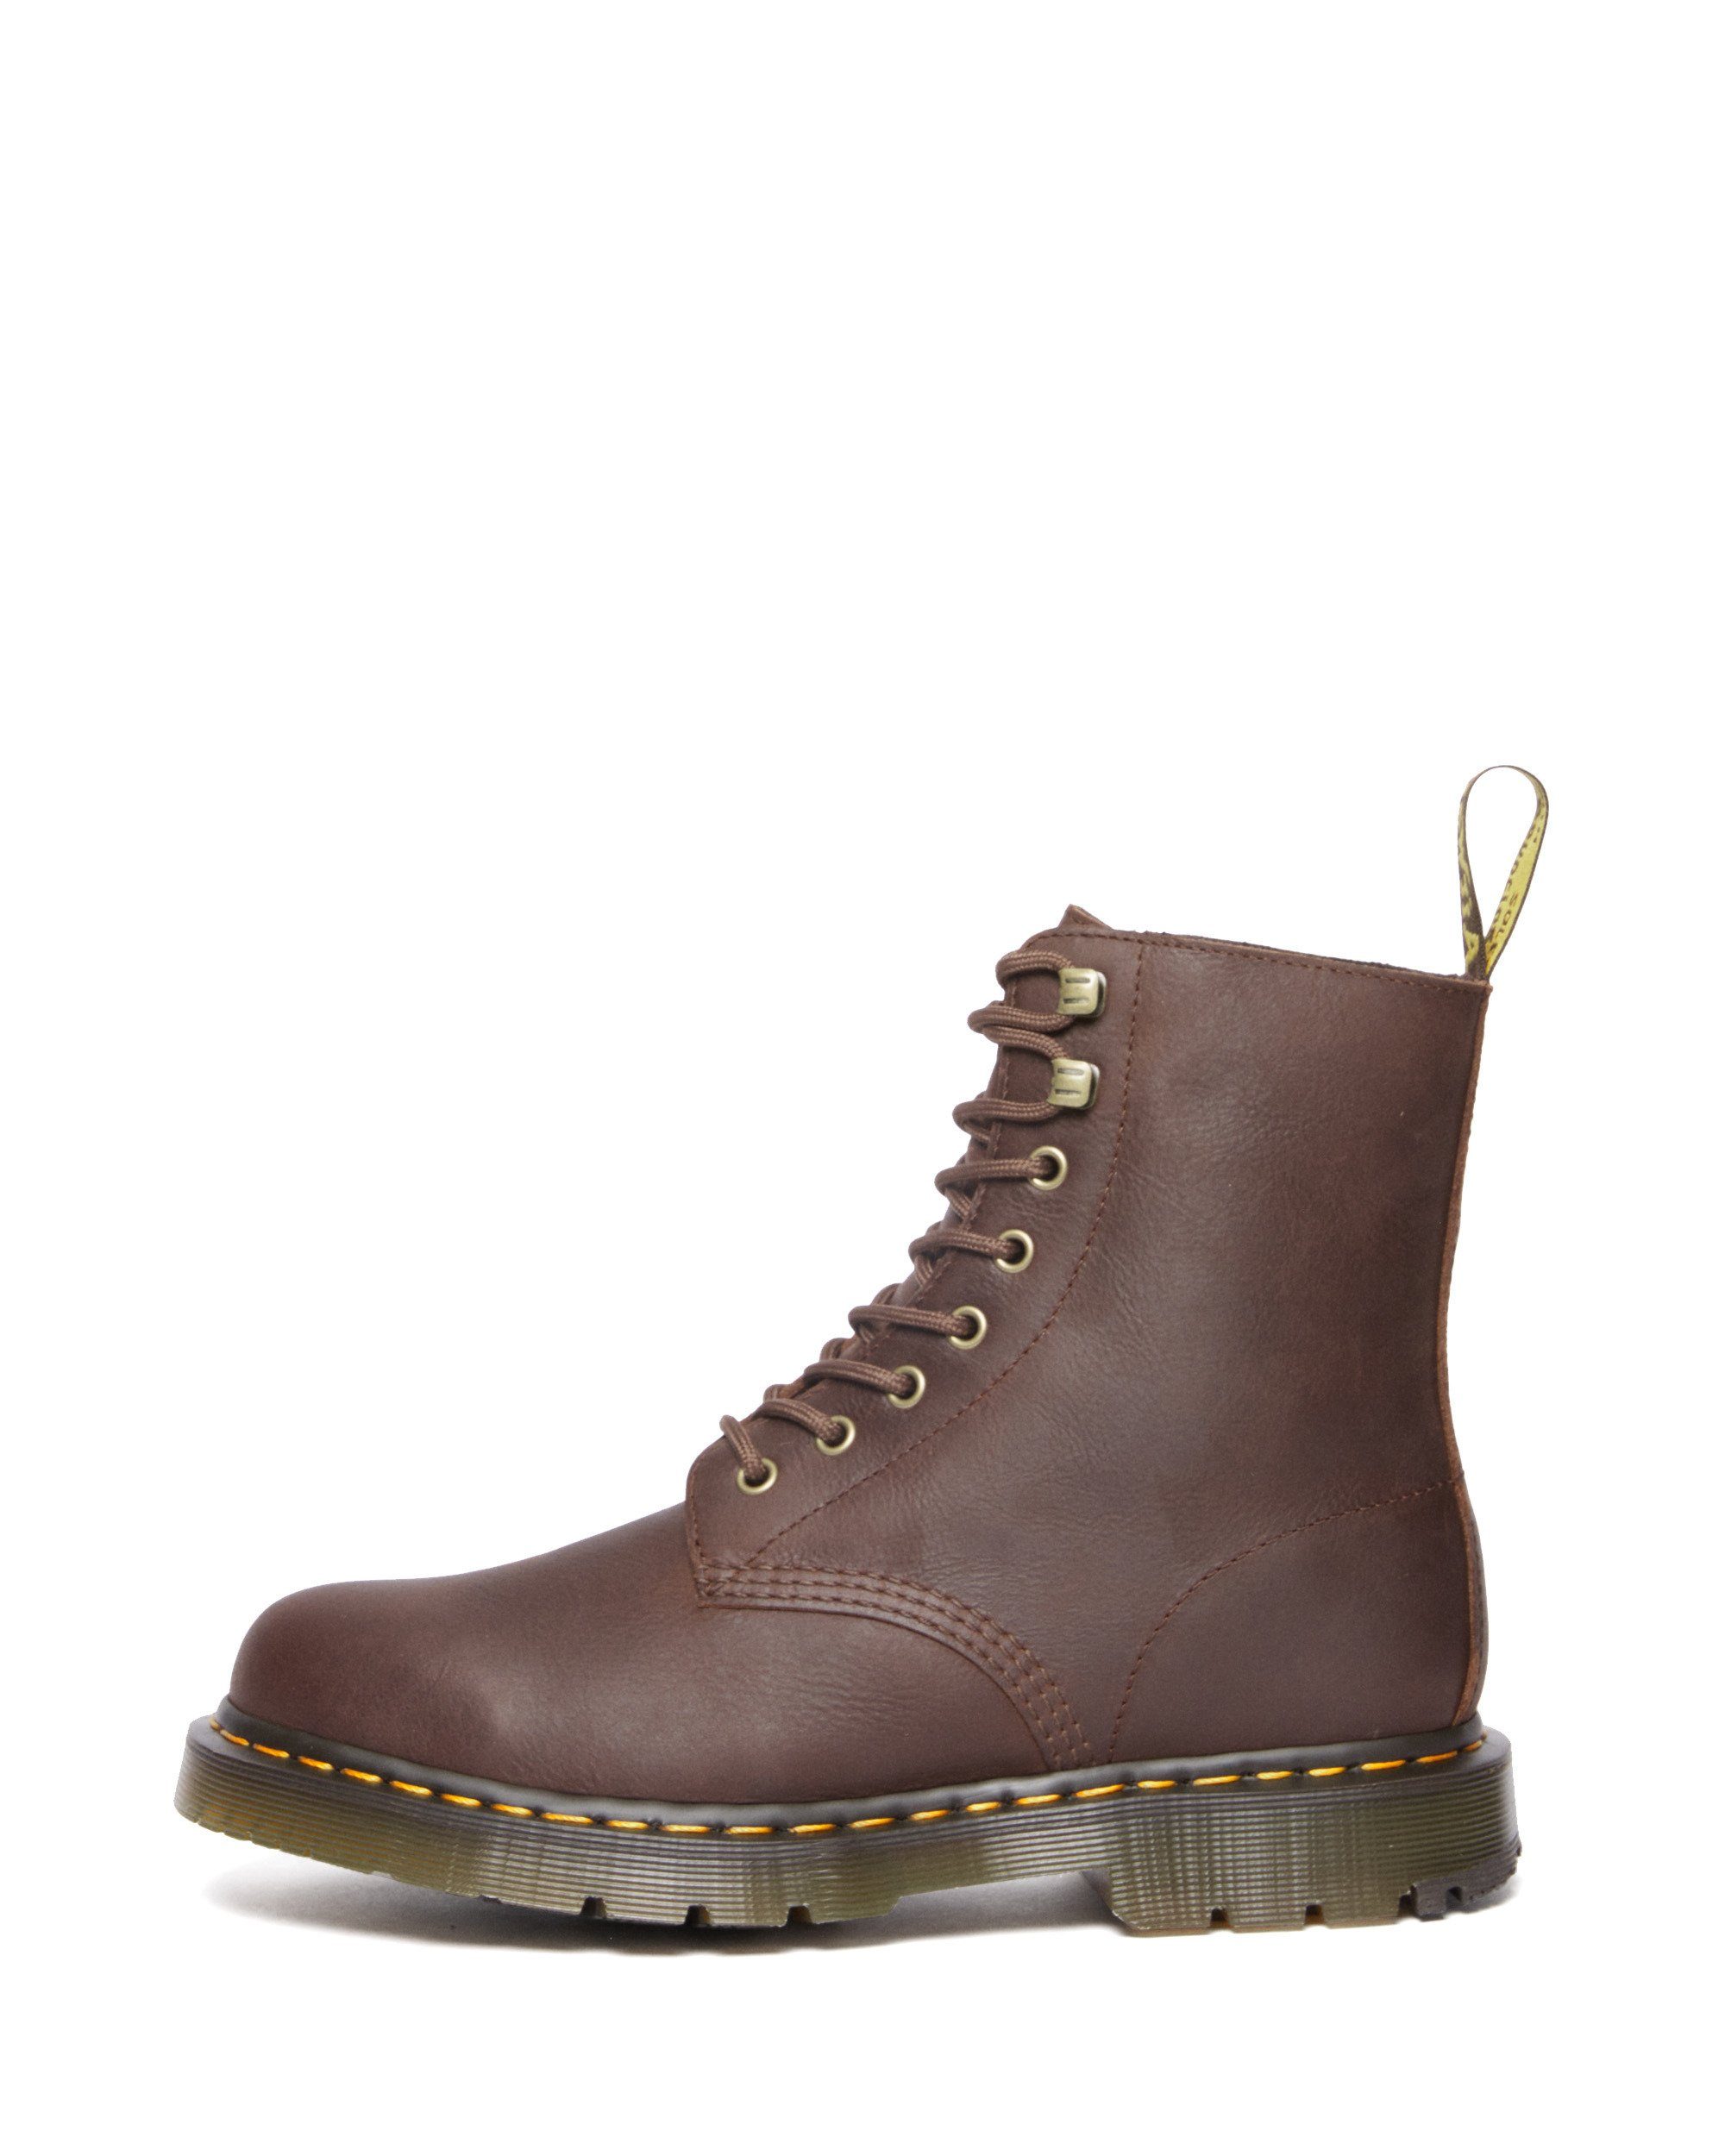 MARTENS Pascal DR. Outlaw (2-tlg) Wintergrip braun Ankleboots WP 1460